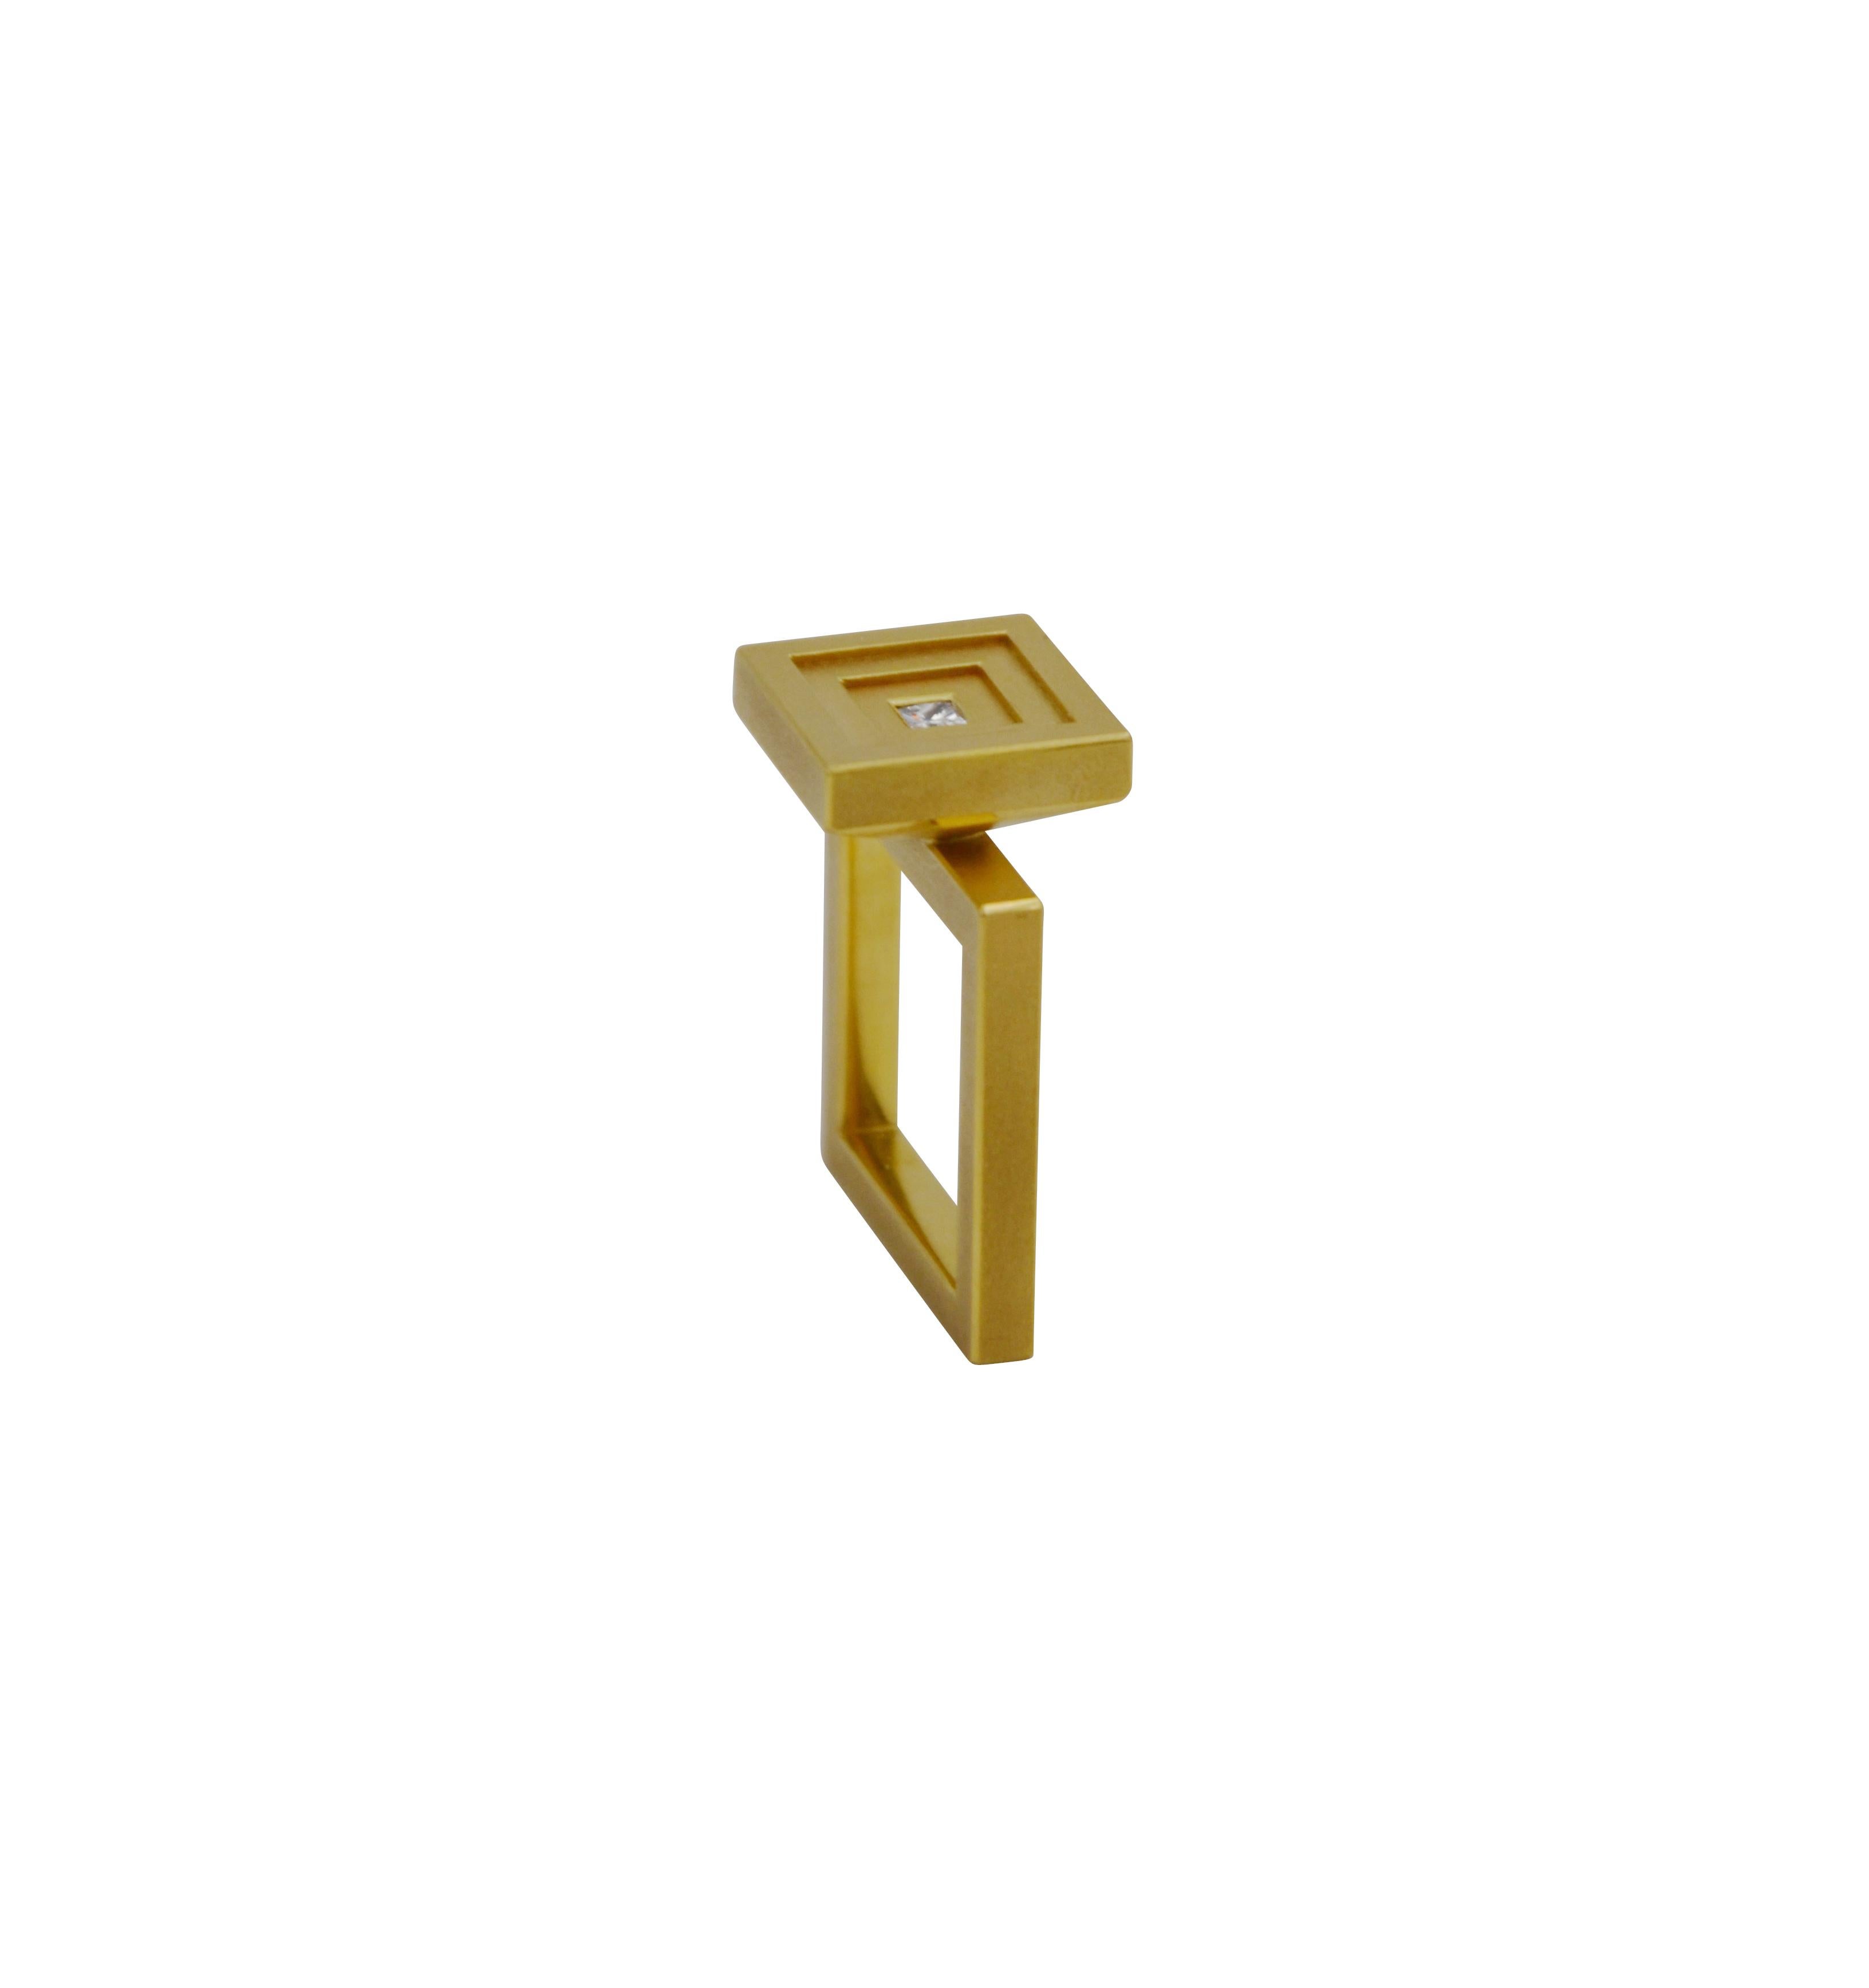 Brilliant Cut Contemporary 18 Karat Yellow Gold Diamond Cocktail Ring For Sale